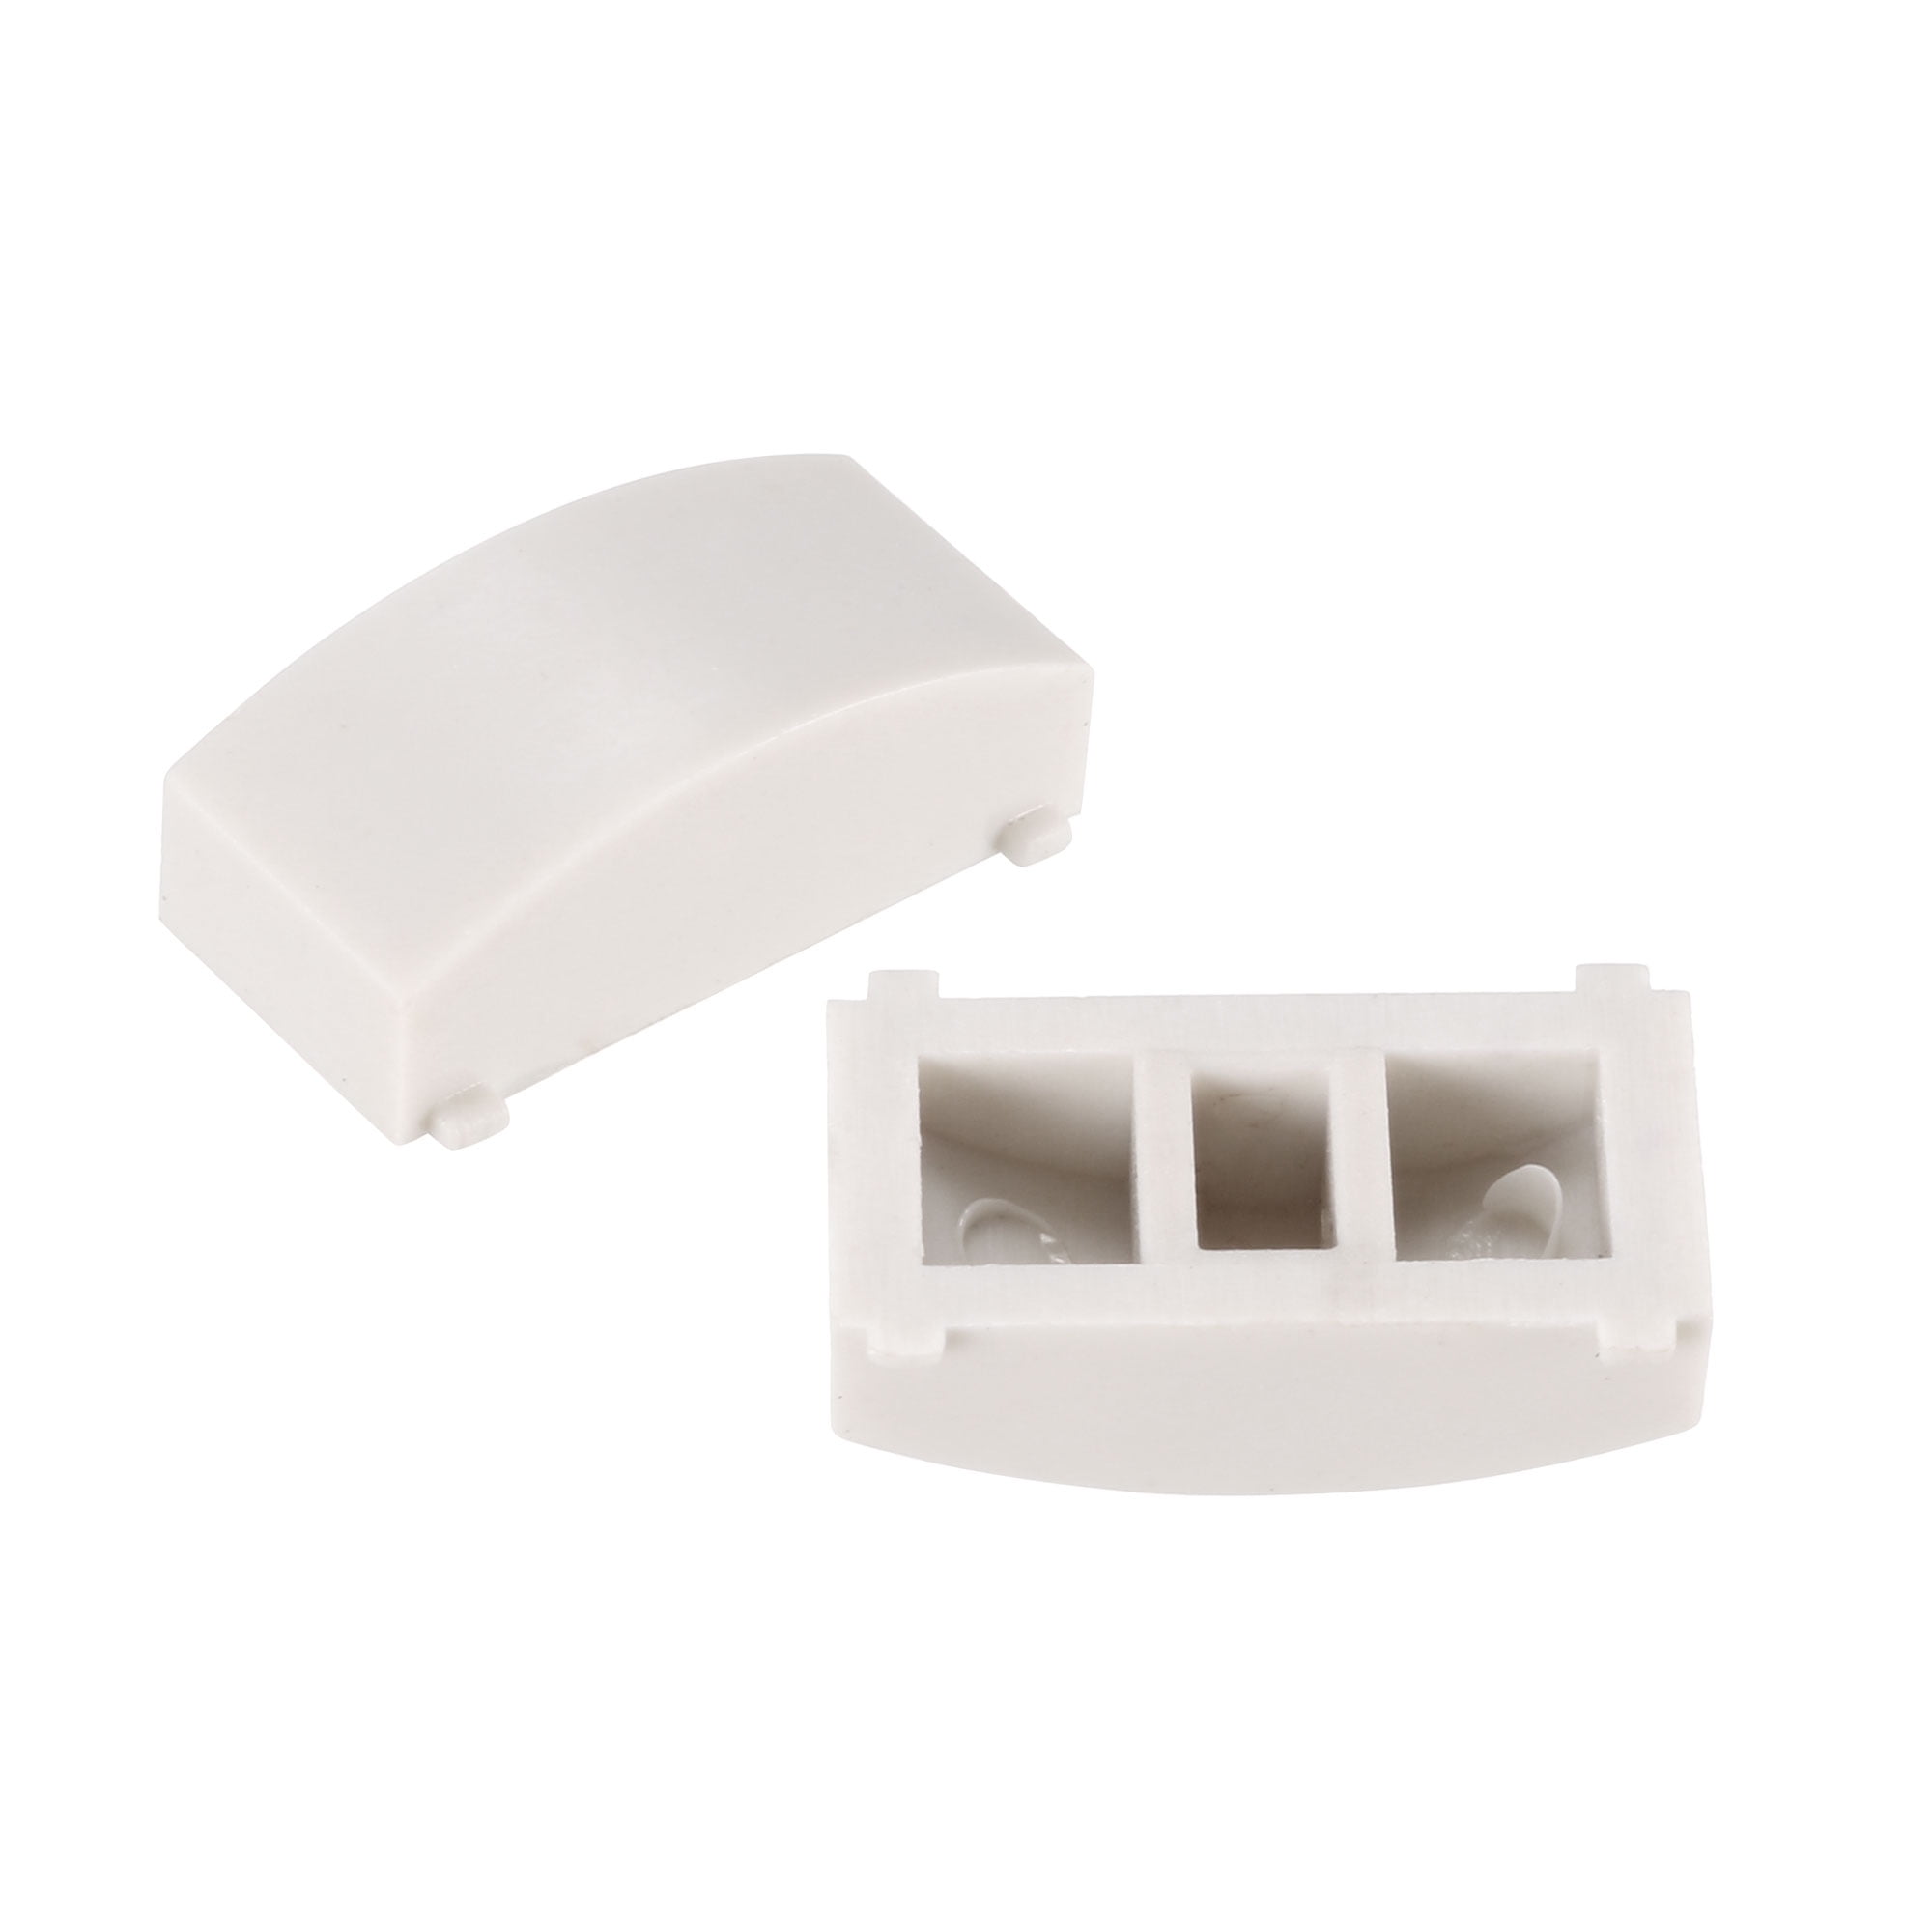 uxcell® 50Pcs Plastic 12.4x4.5mm Tact Switch Caps Cover Keycaps White for 8x8 Latching Pushbutton Tactile Switch